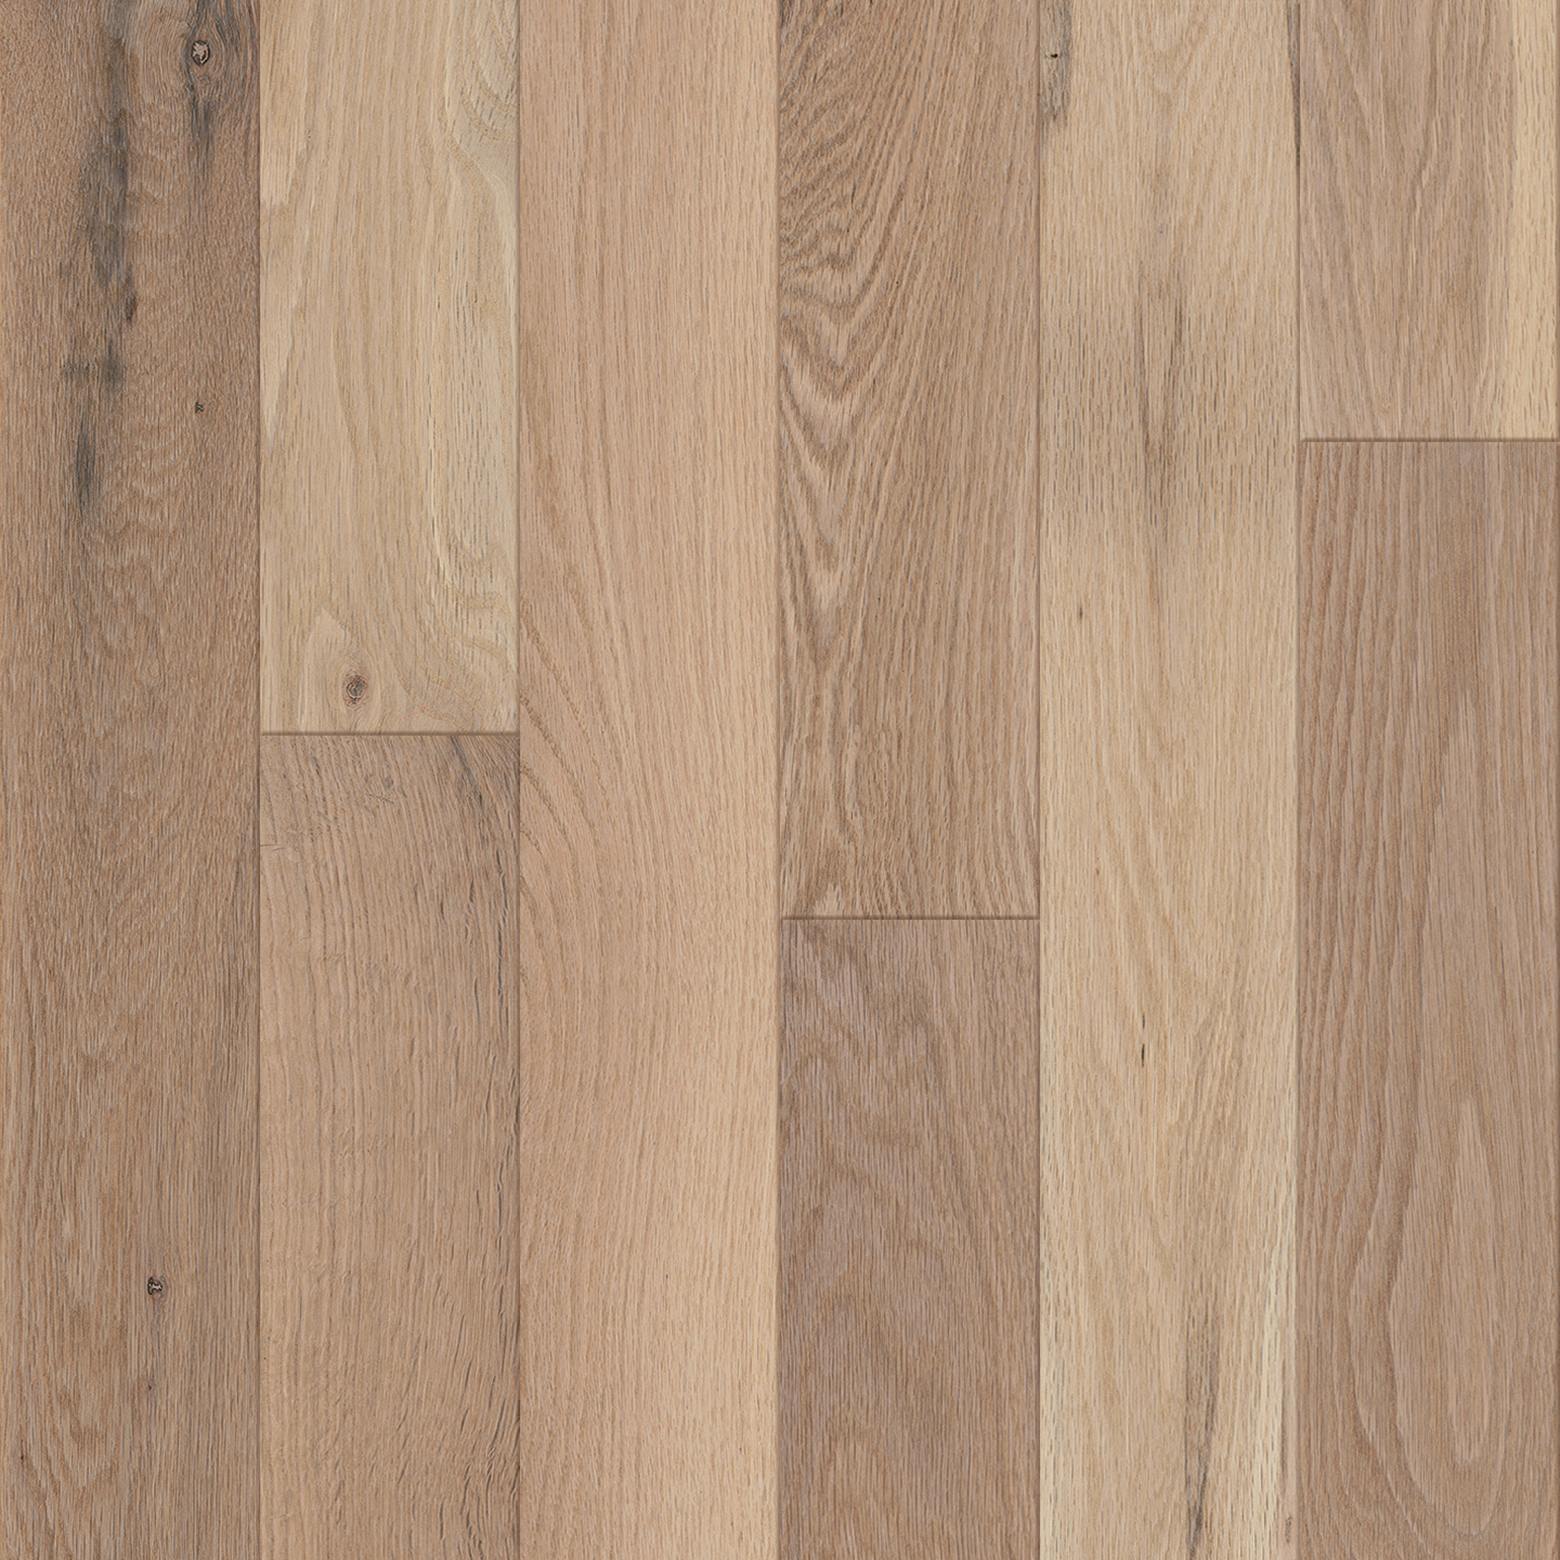 Bruce Dundee Plank 4 Inviting Warmth, How To Install Bruce Hardwood Flooring